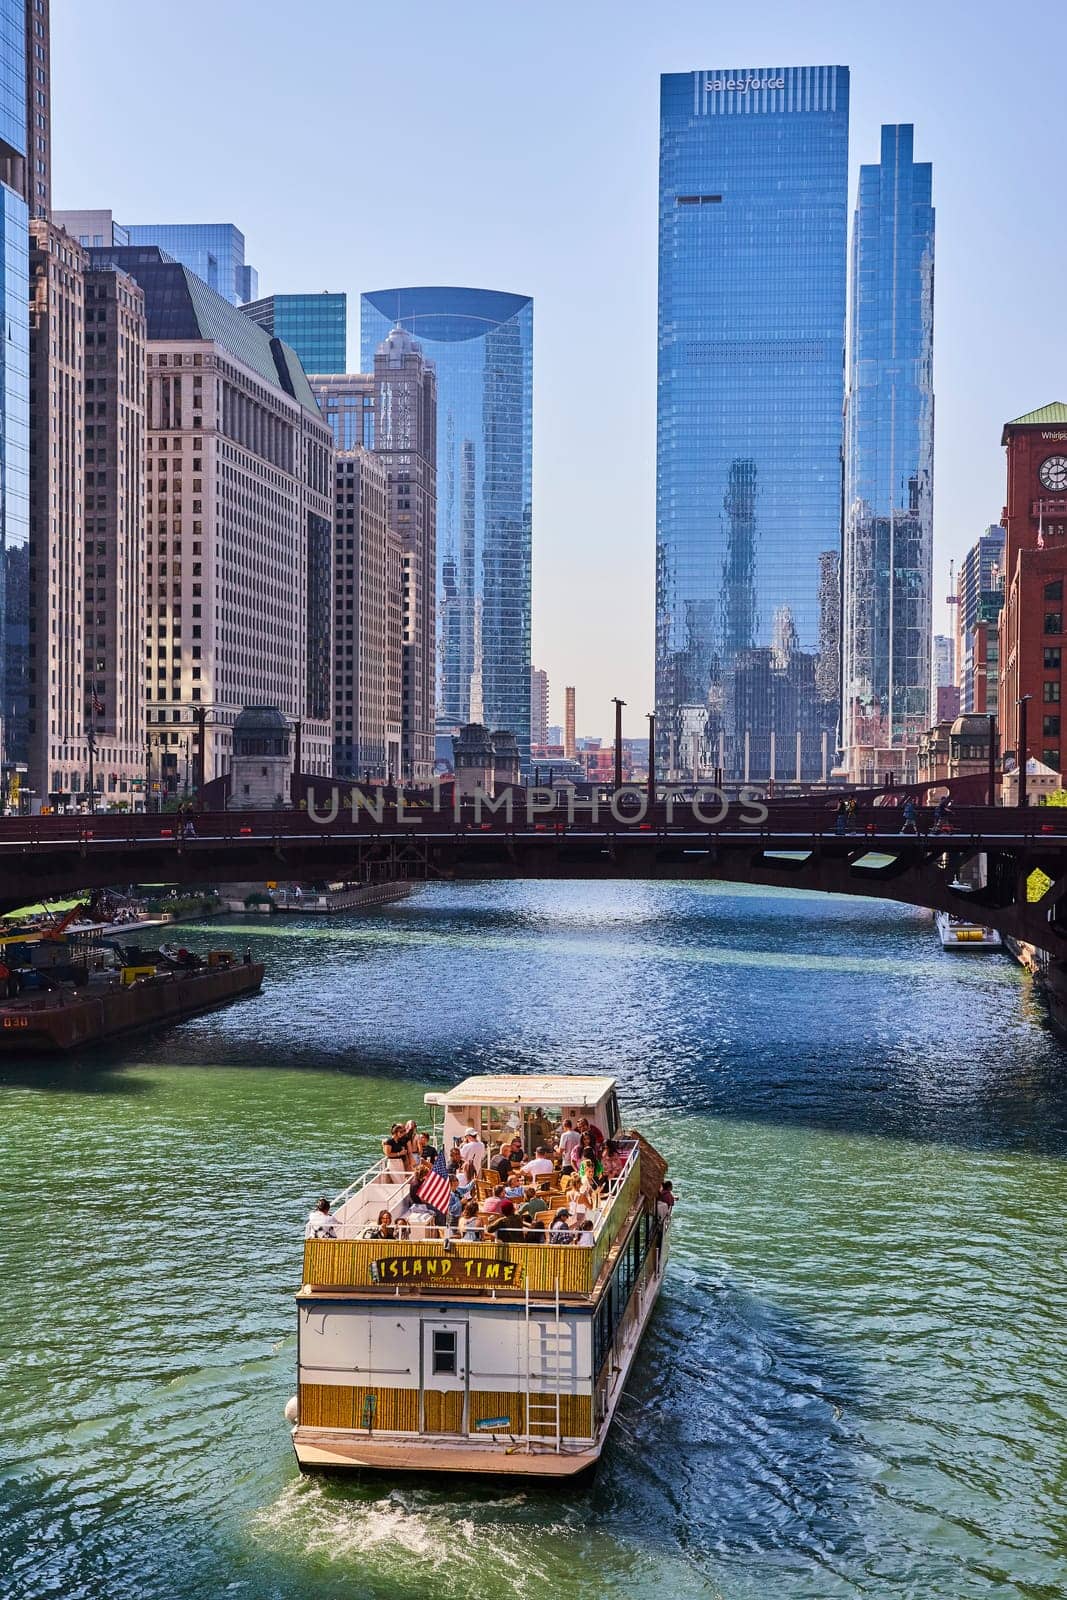 Sunny tour boat, party boat on Chicago canal toward bridge on sunny day with blue skyscrapers, USA by njproductions